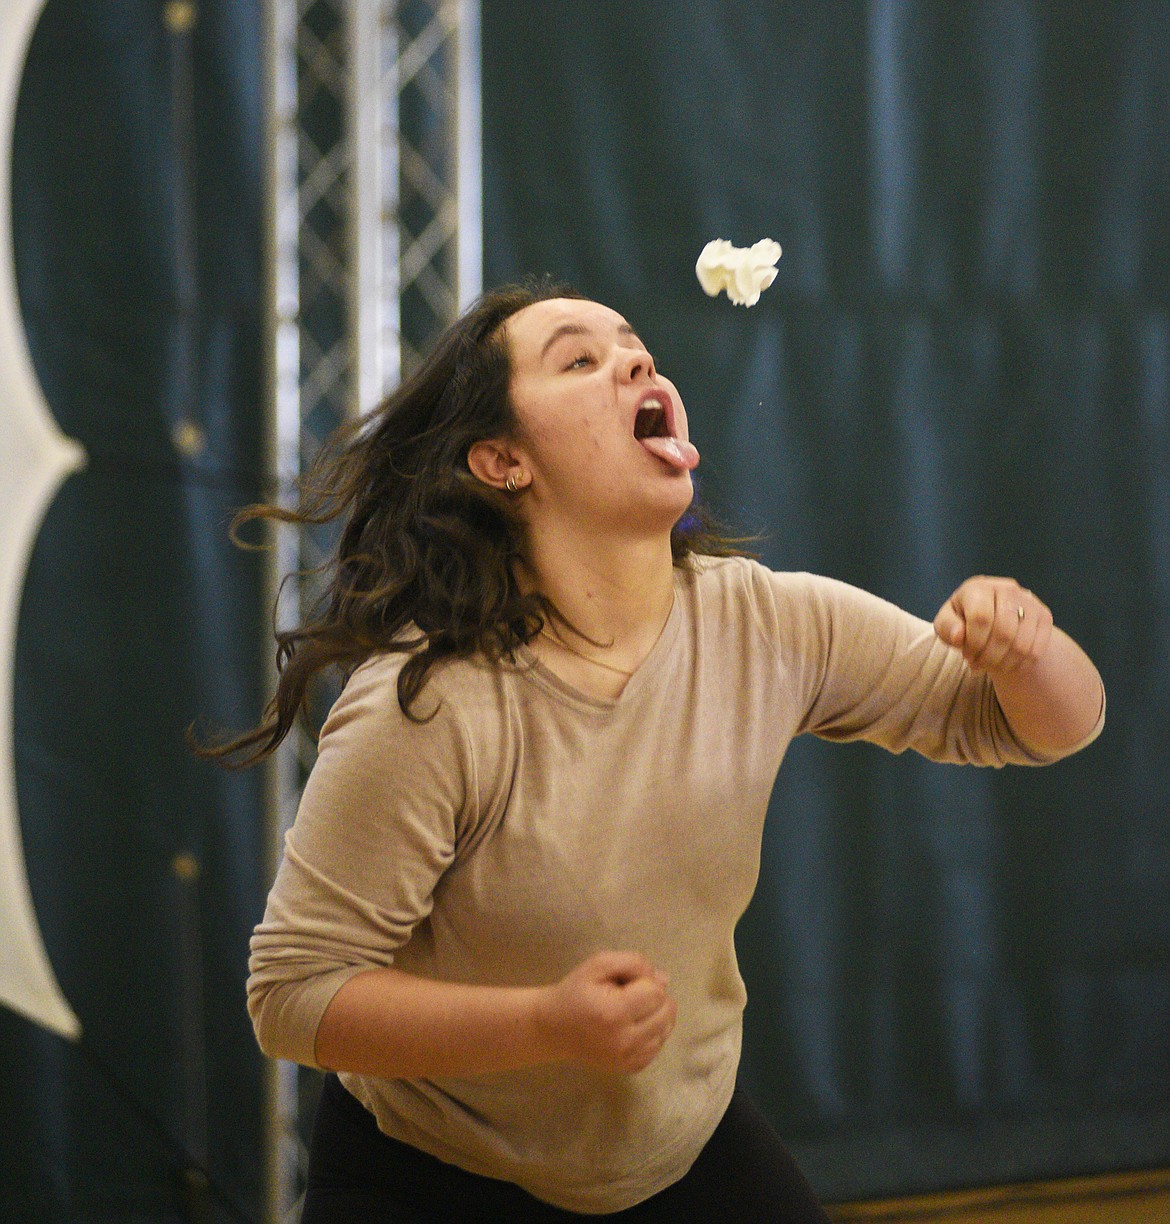 A student tries to catch some whipped cream in a competition during iThinkBig's assembly last Wednesday at Whitefish High School. (Daniel McKay/Whitefish Pilot)